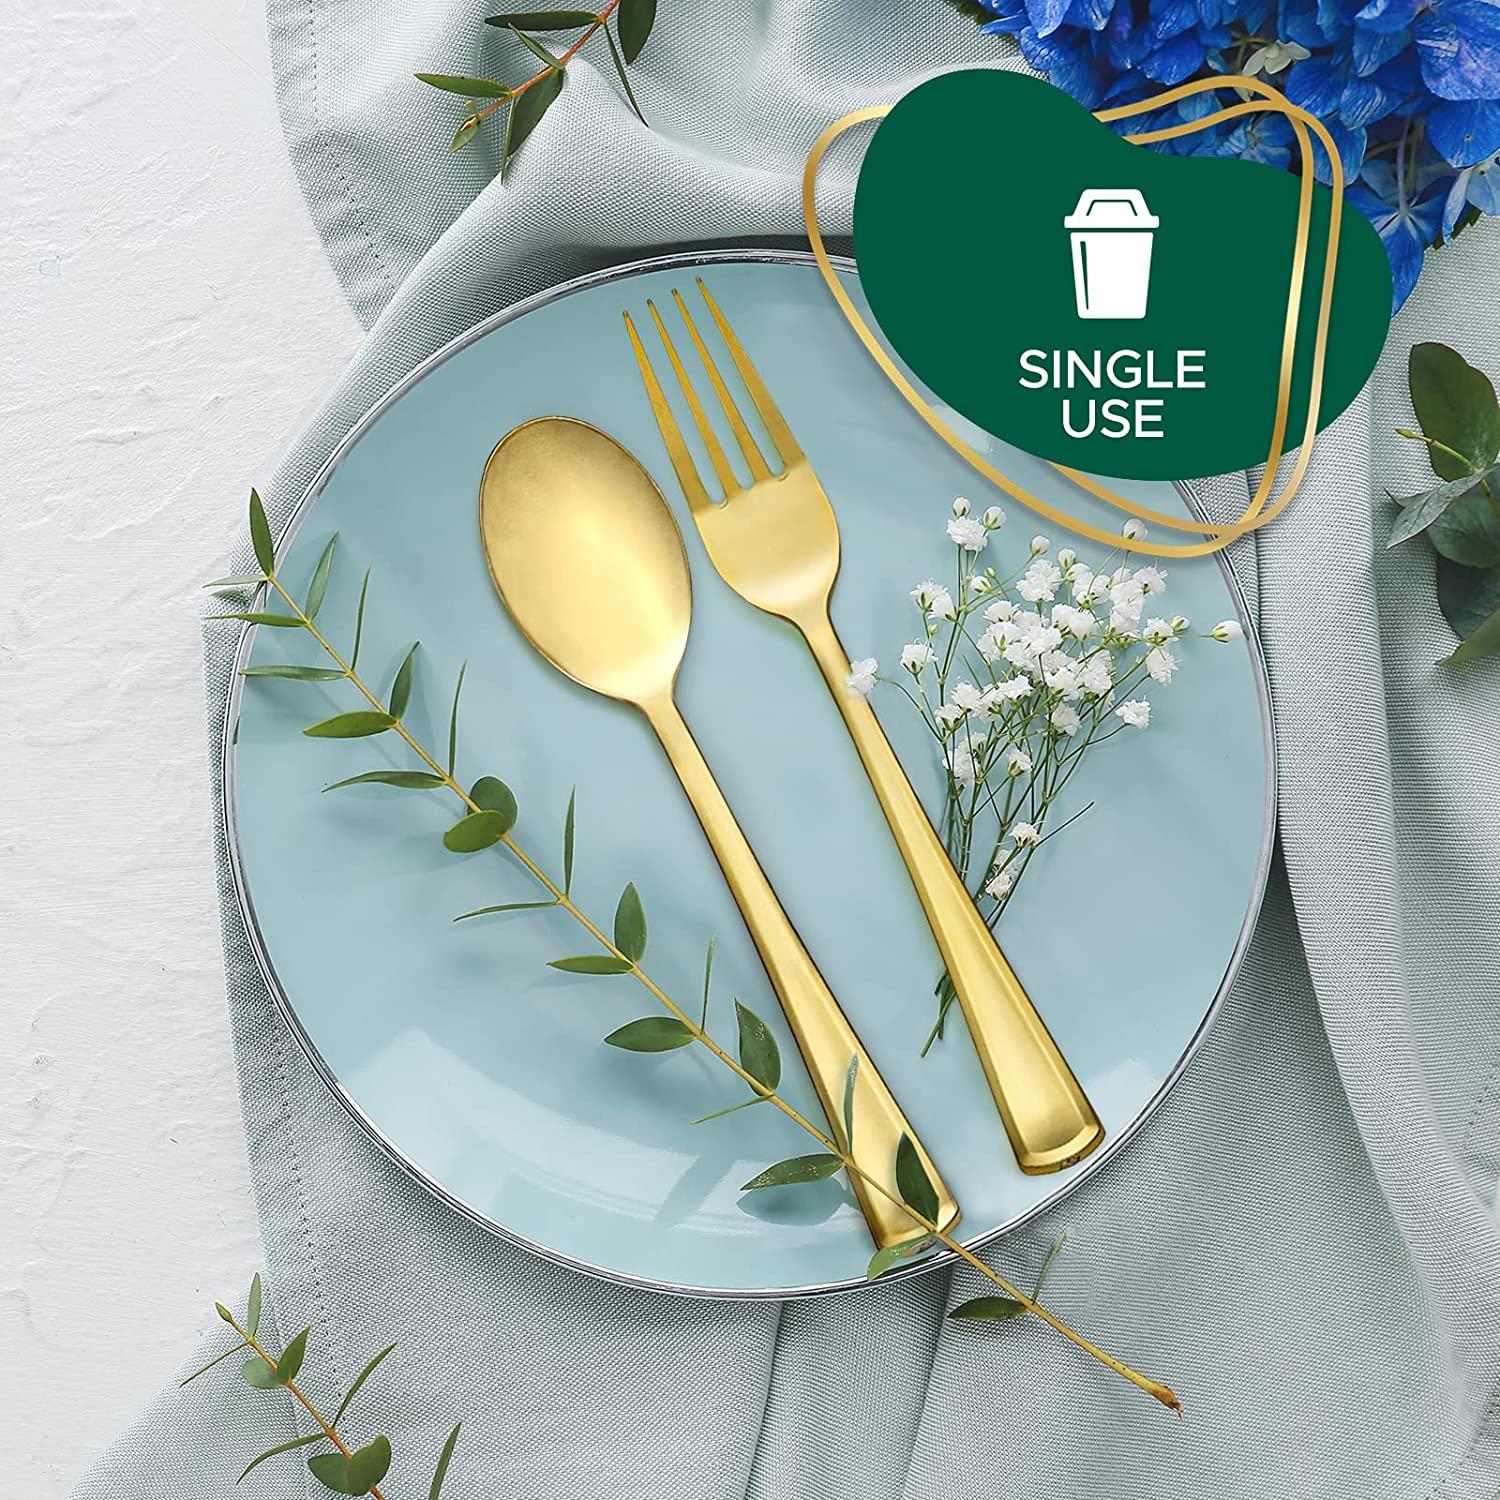 Elegant Plastic Silverware Set | 25 Each Heavyweight Disposable Forks, Knives & Spoons Beautifully Presented in Pre Rolled Party Napkins Premium